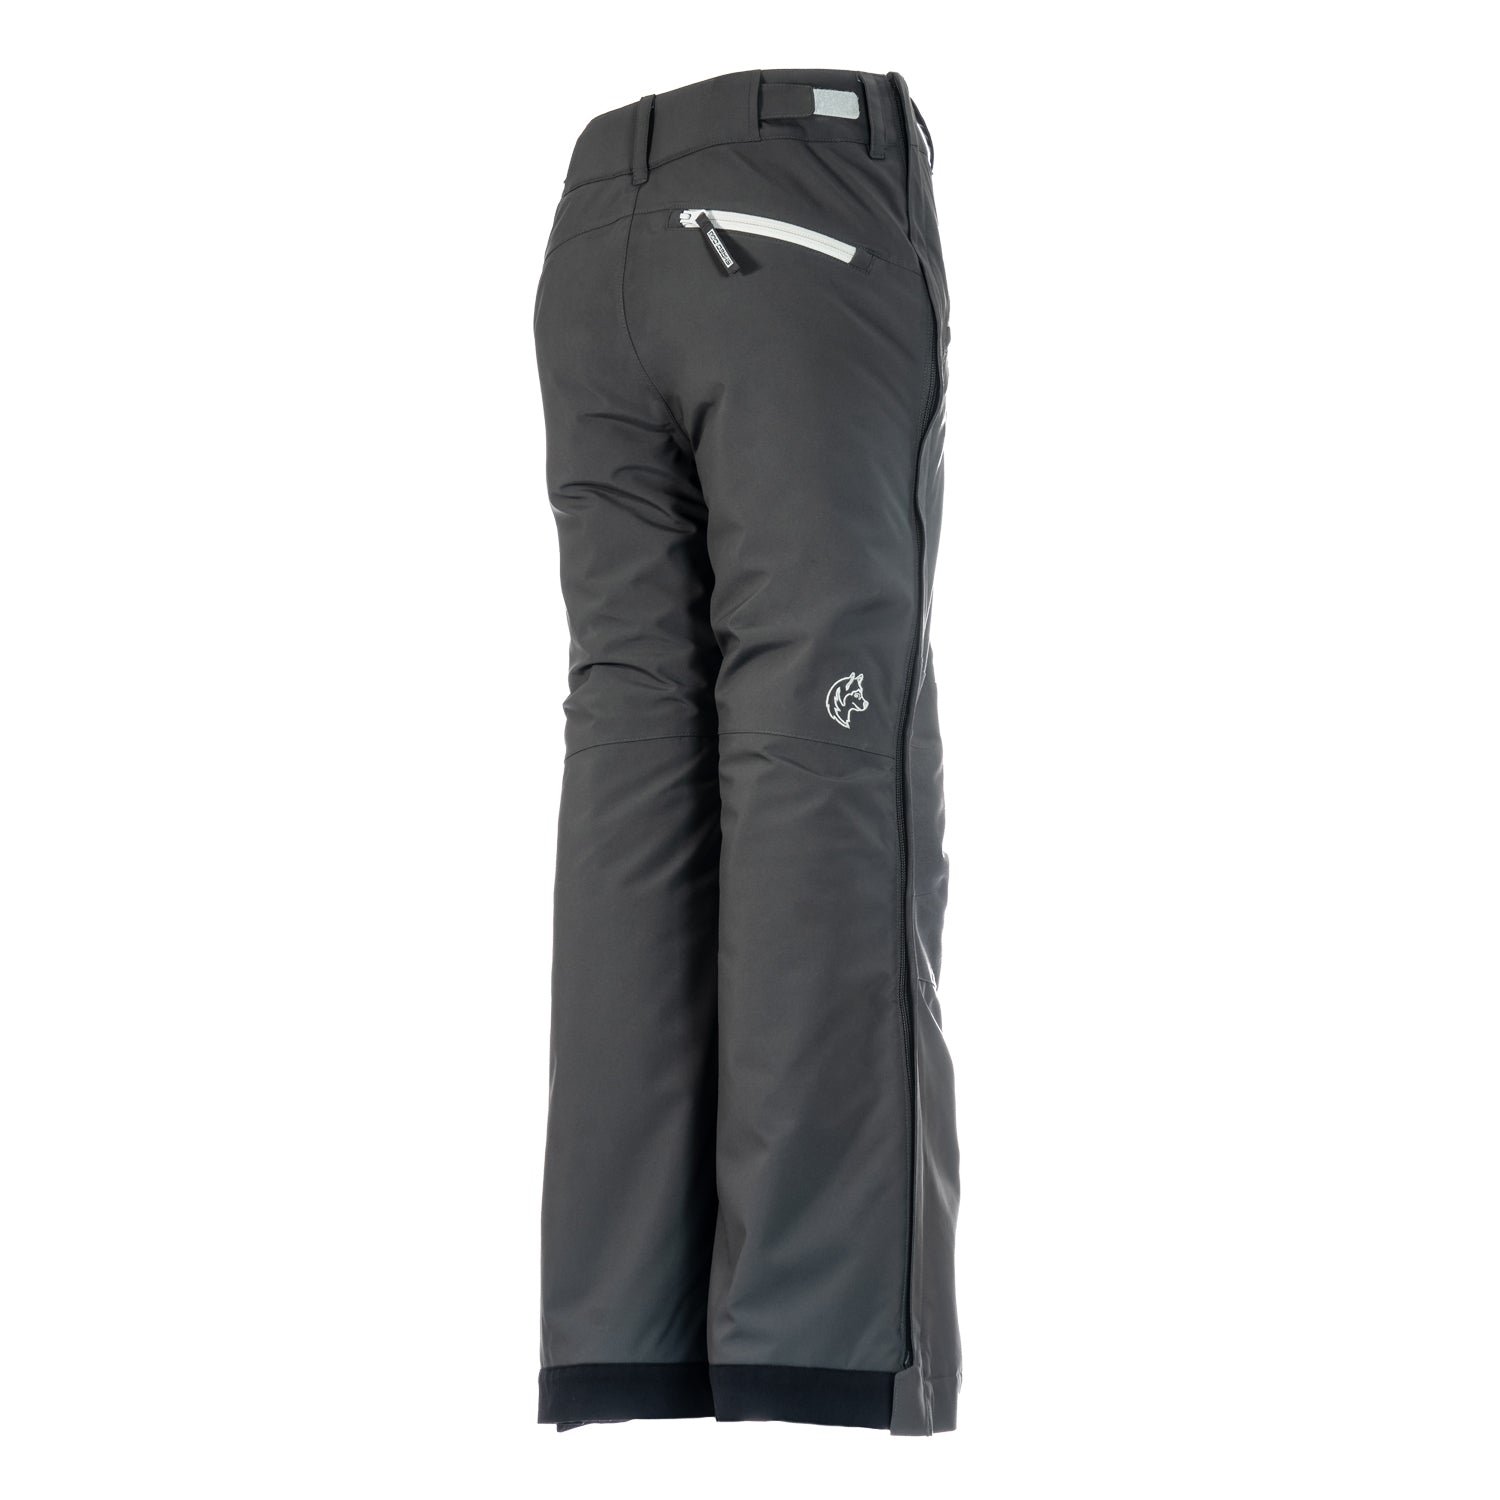 BV All Mountain - Elevated Zip-Off Race Pants